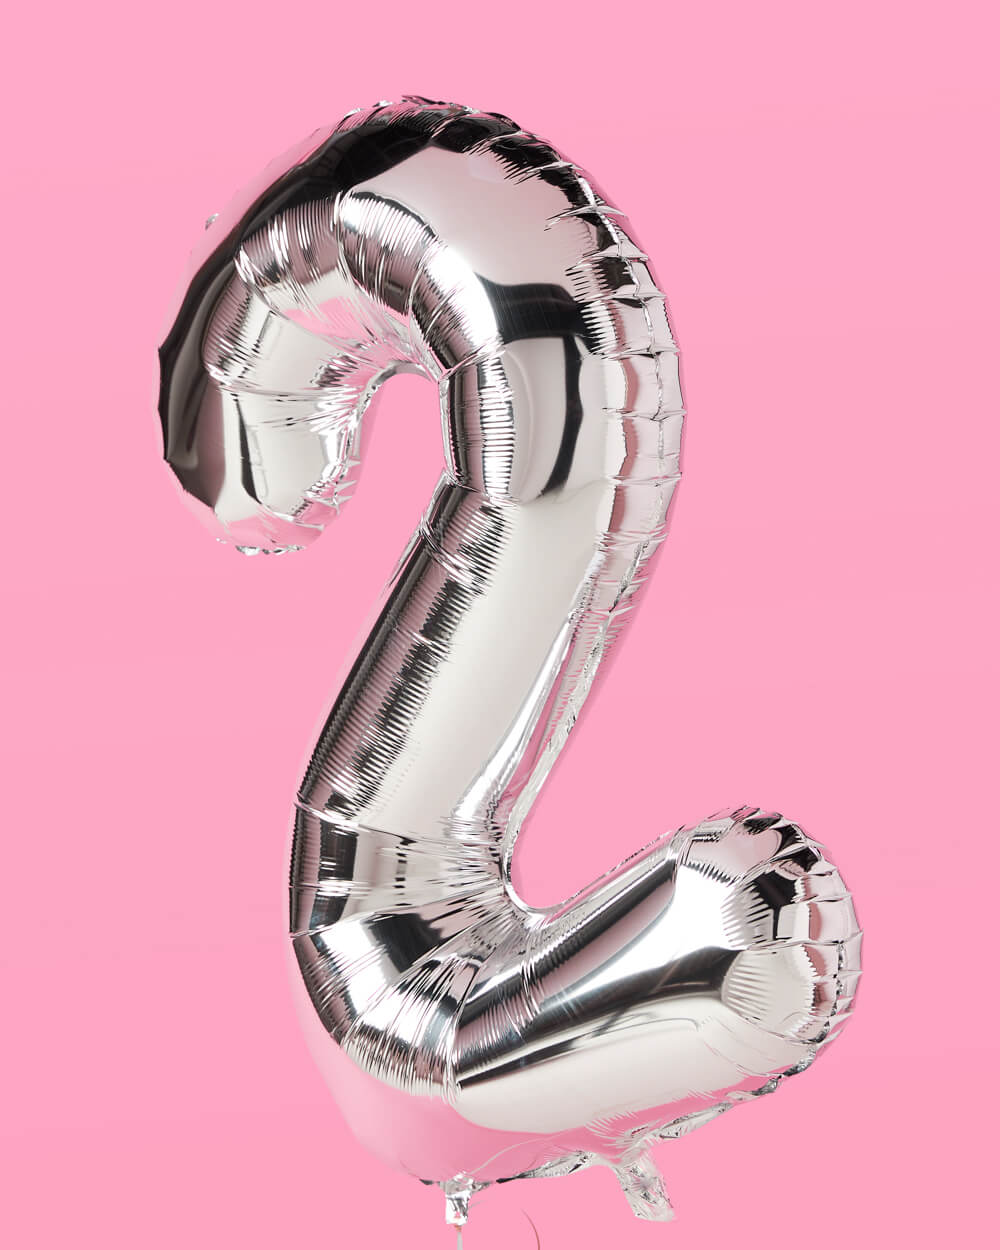 25 Number Balloons - 40" silver foil balloons